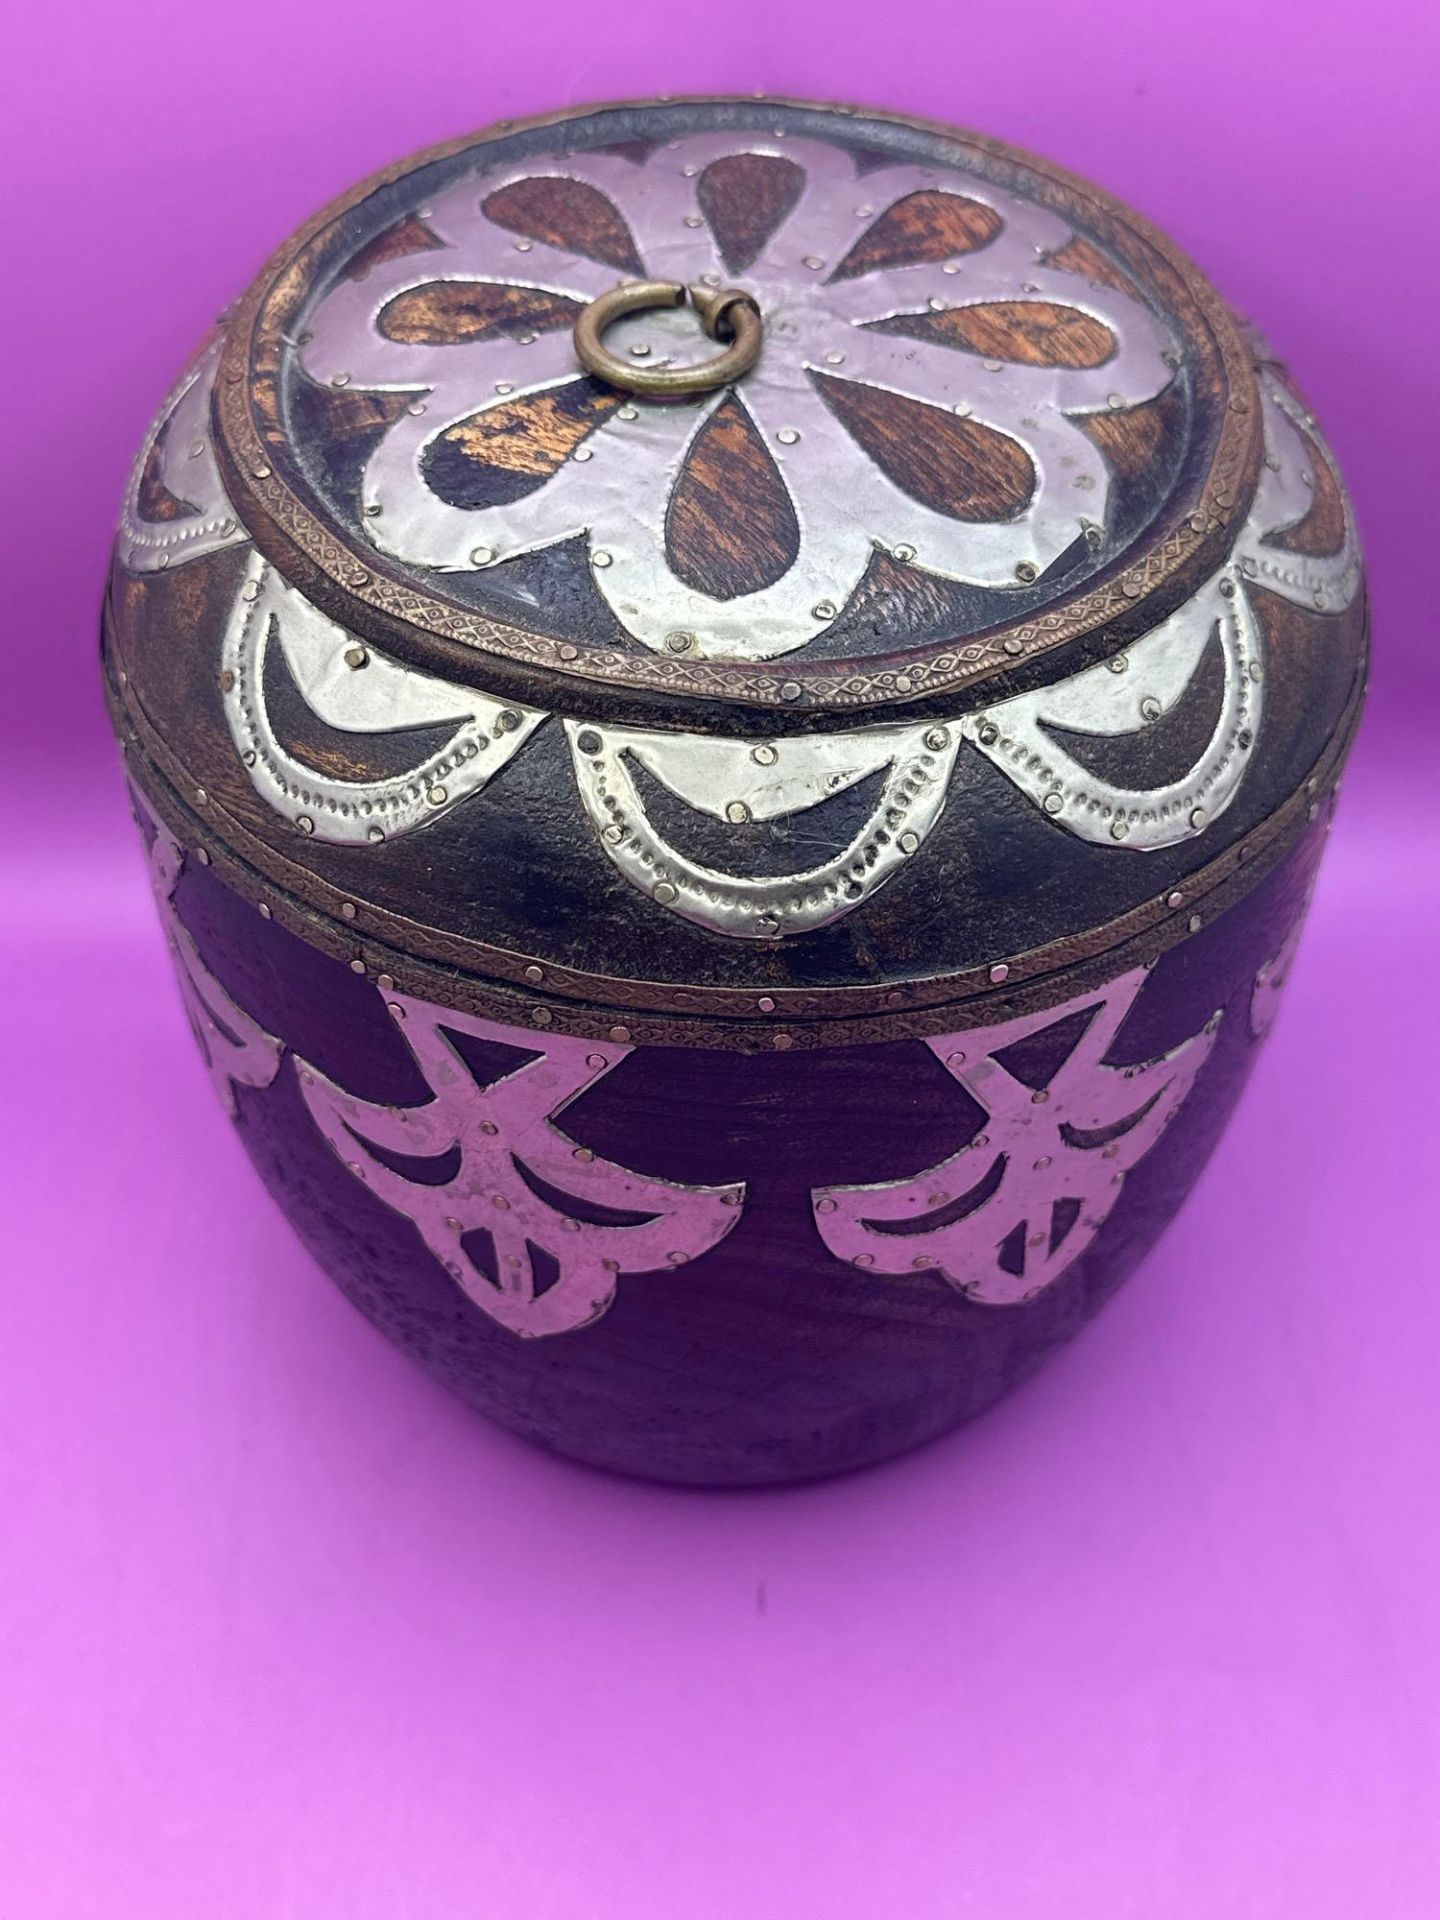 Wooden Round Decorated Pot With Lid 16 X 17cm - Image 2 of 5